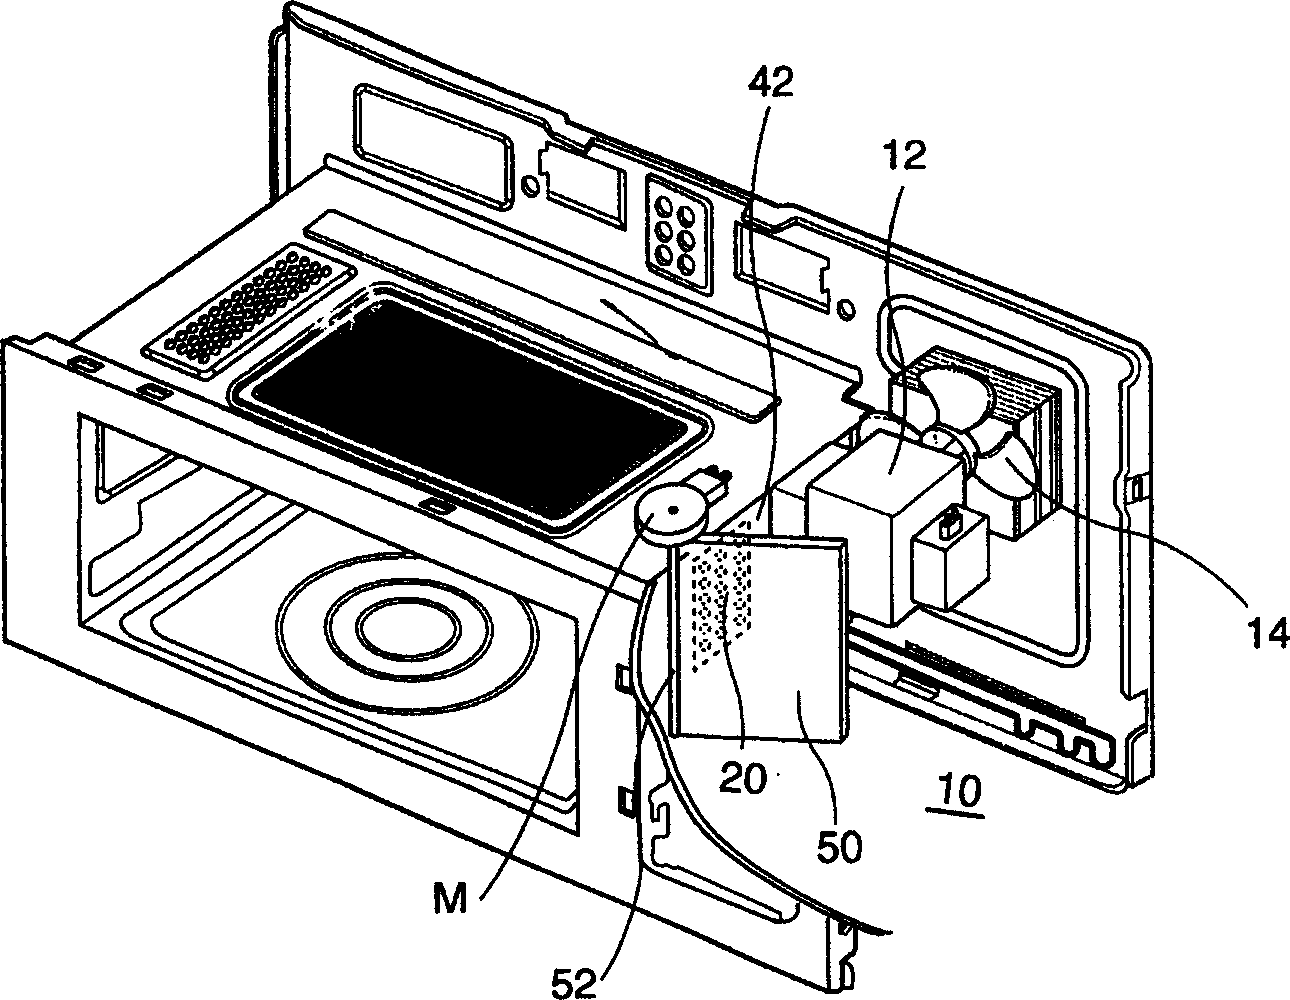 Air flow guide apparatus for microwave oven